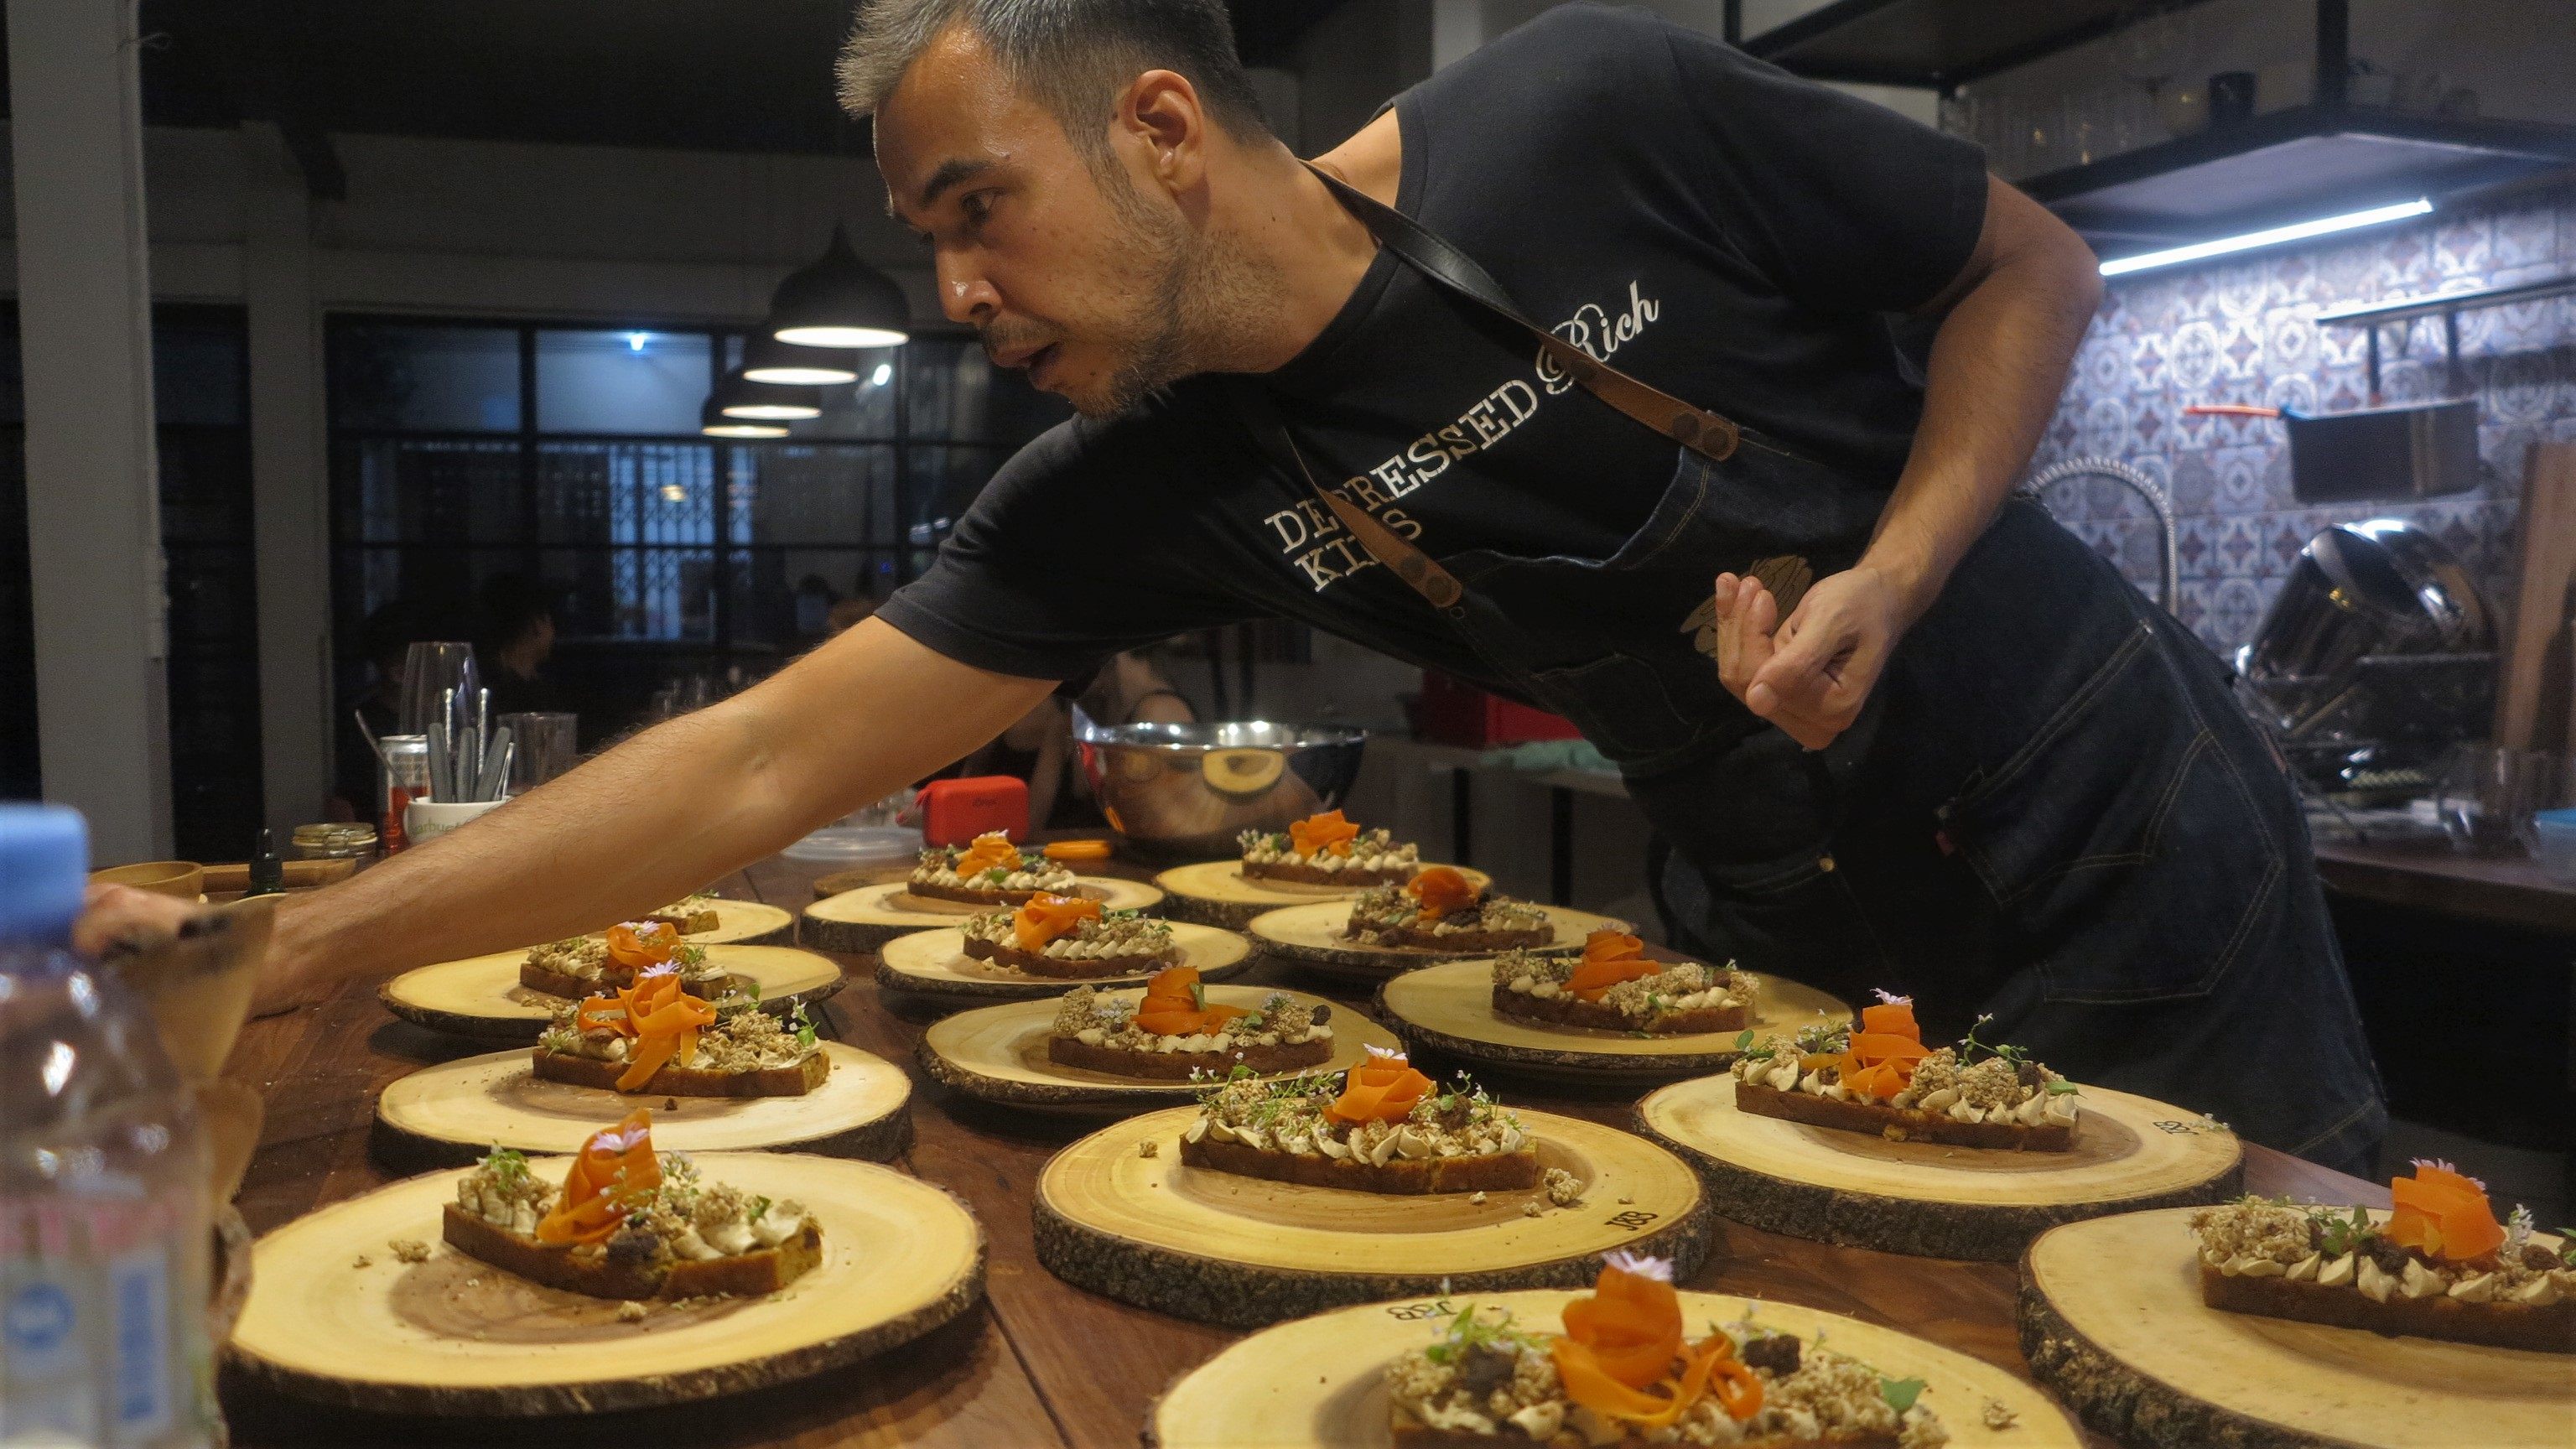 Chef Steven John prepares dishes flavoured with cannabis for a private dinner in Bangkok, Thailand. Photo: Empty Plates